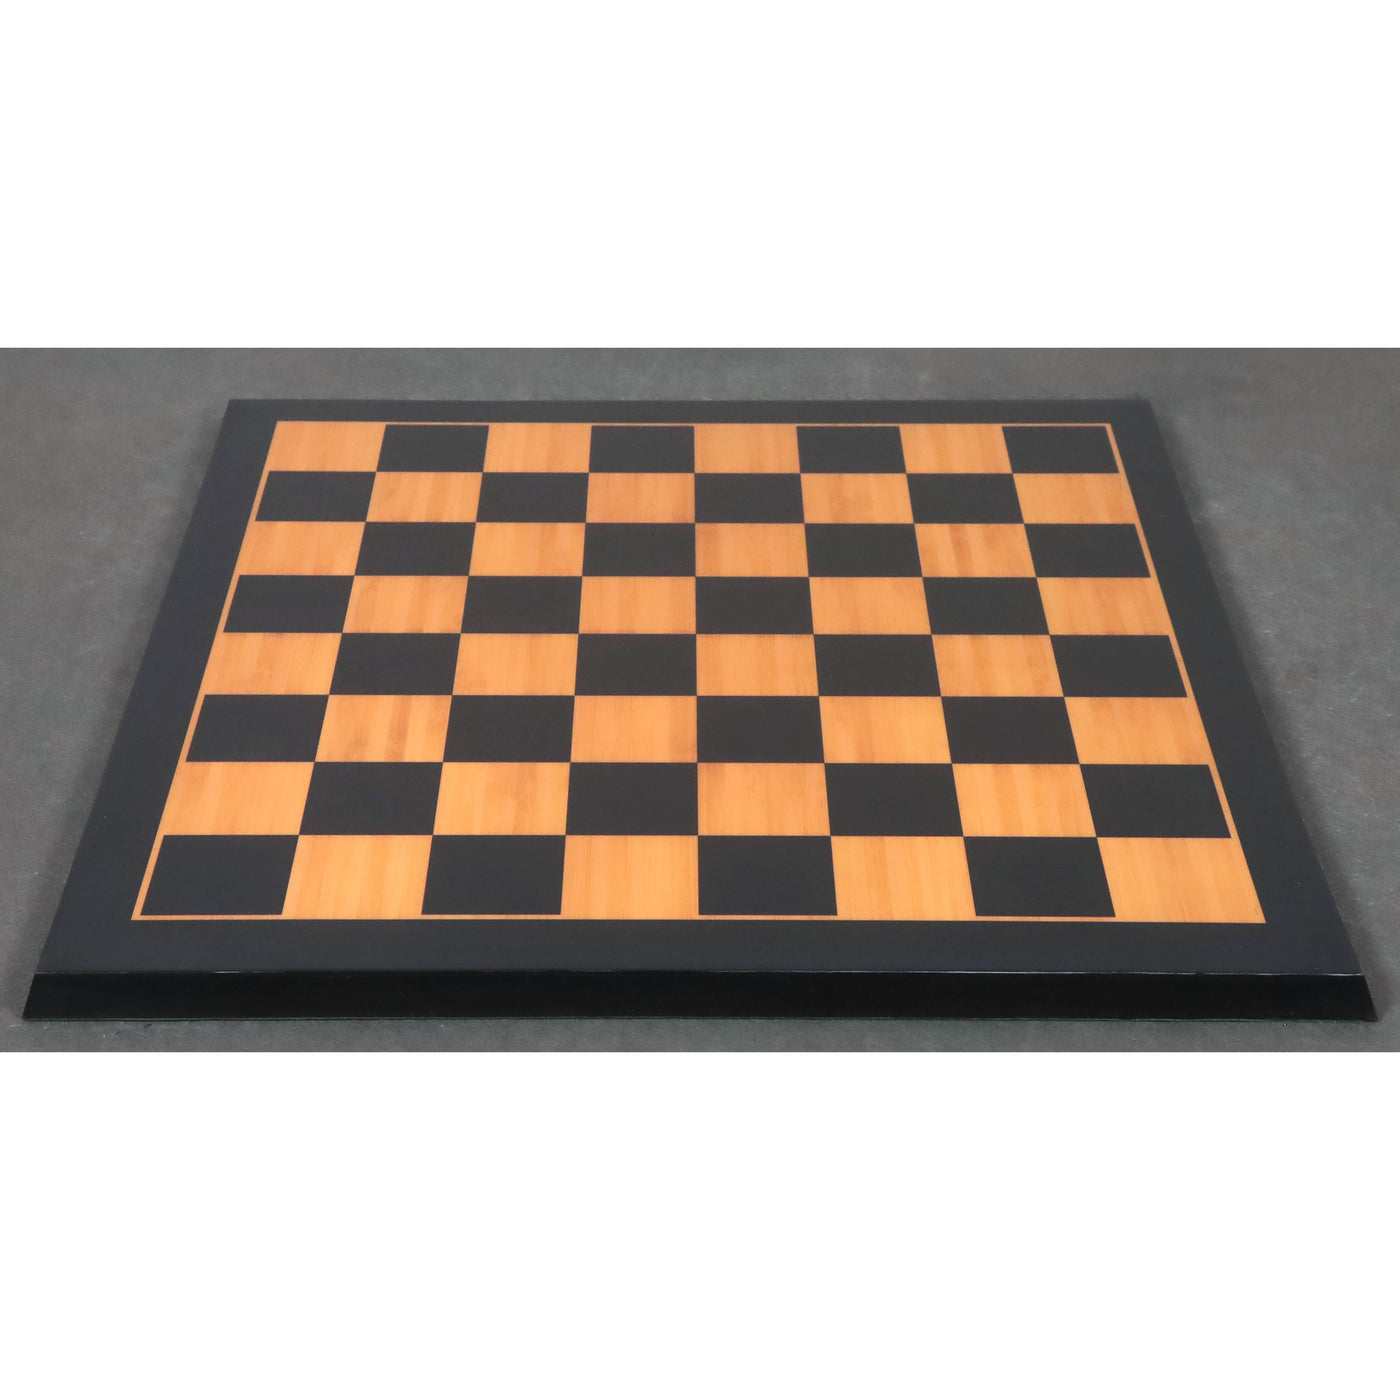  Wooden Printed Chess Board-Antique Boxwood & Ebony - Wood Chess Sets